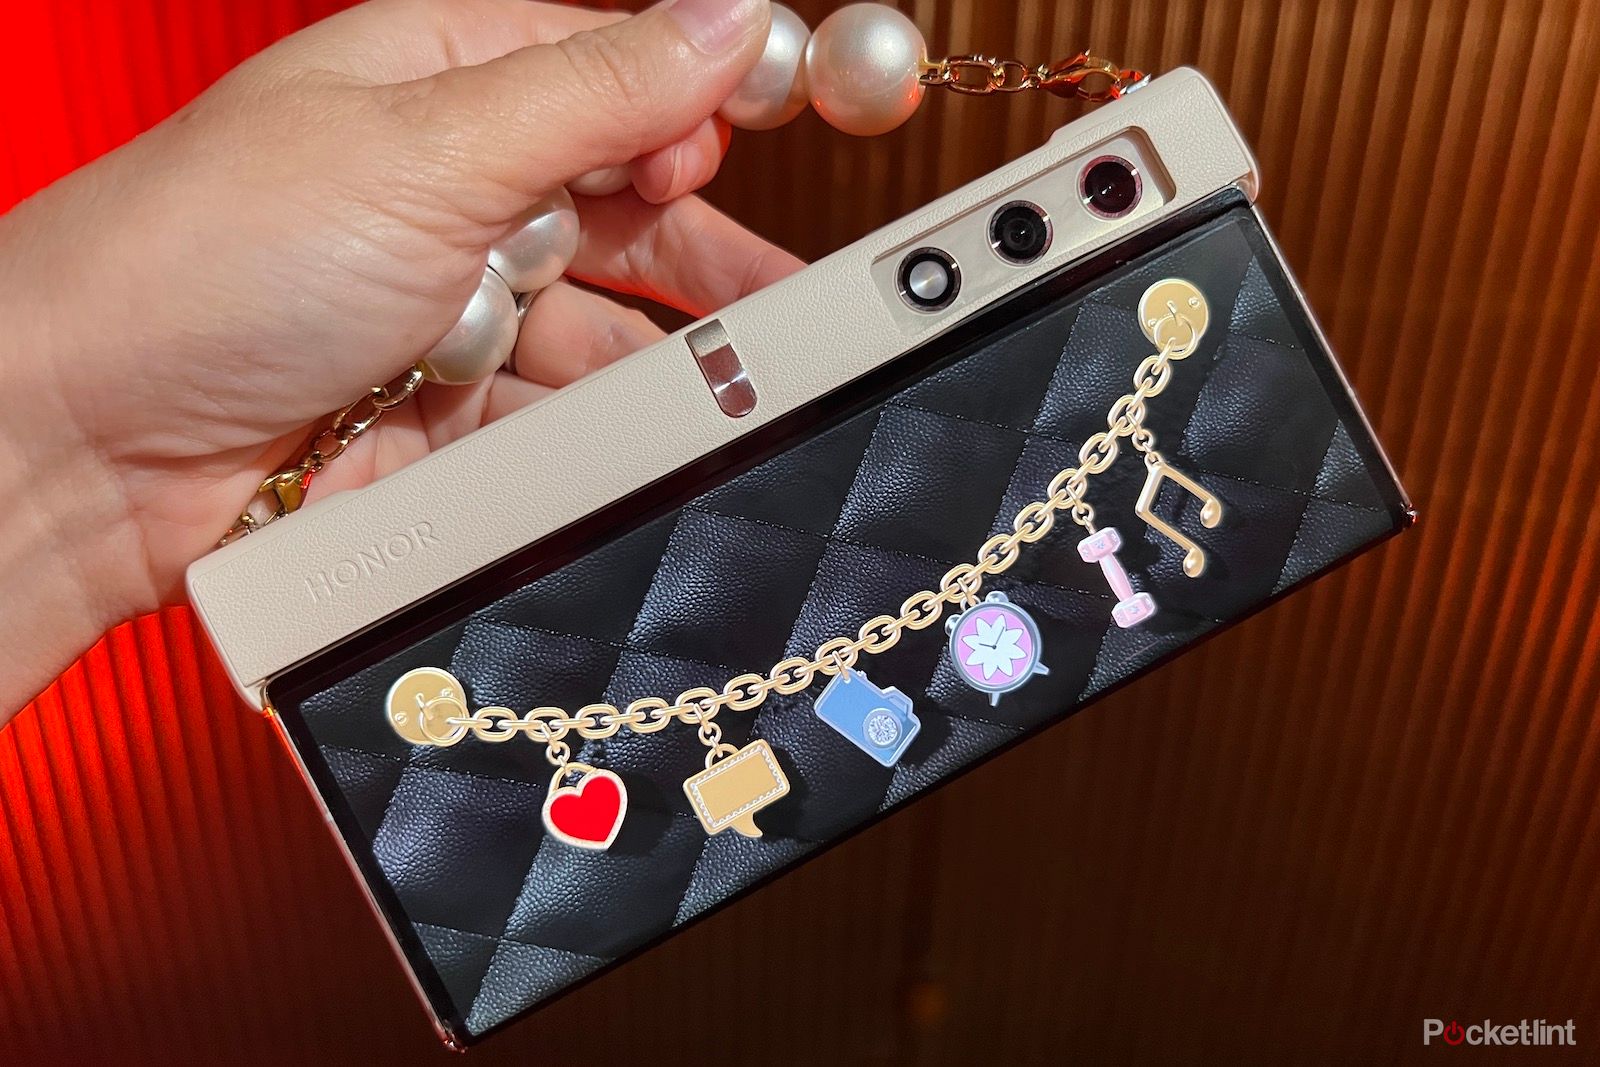 I tried out the Honor V Purse that wants to make phones wearable